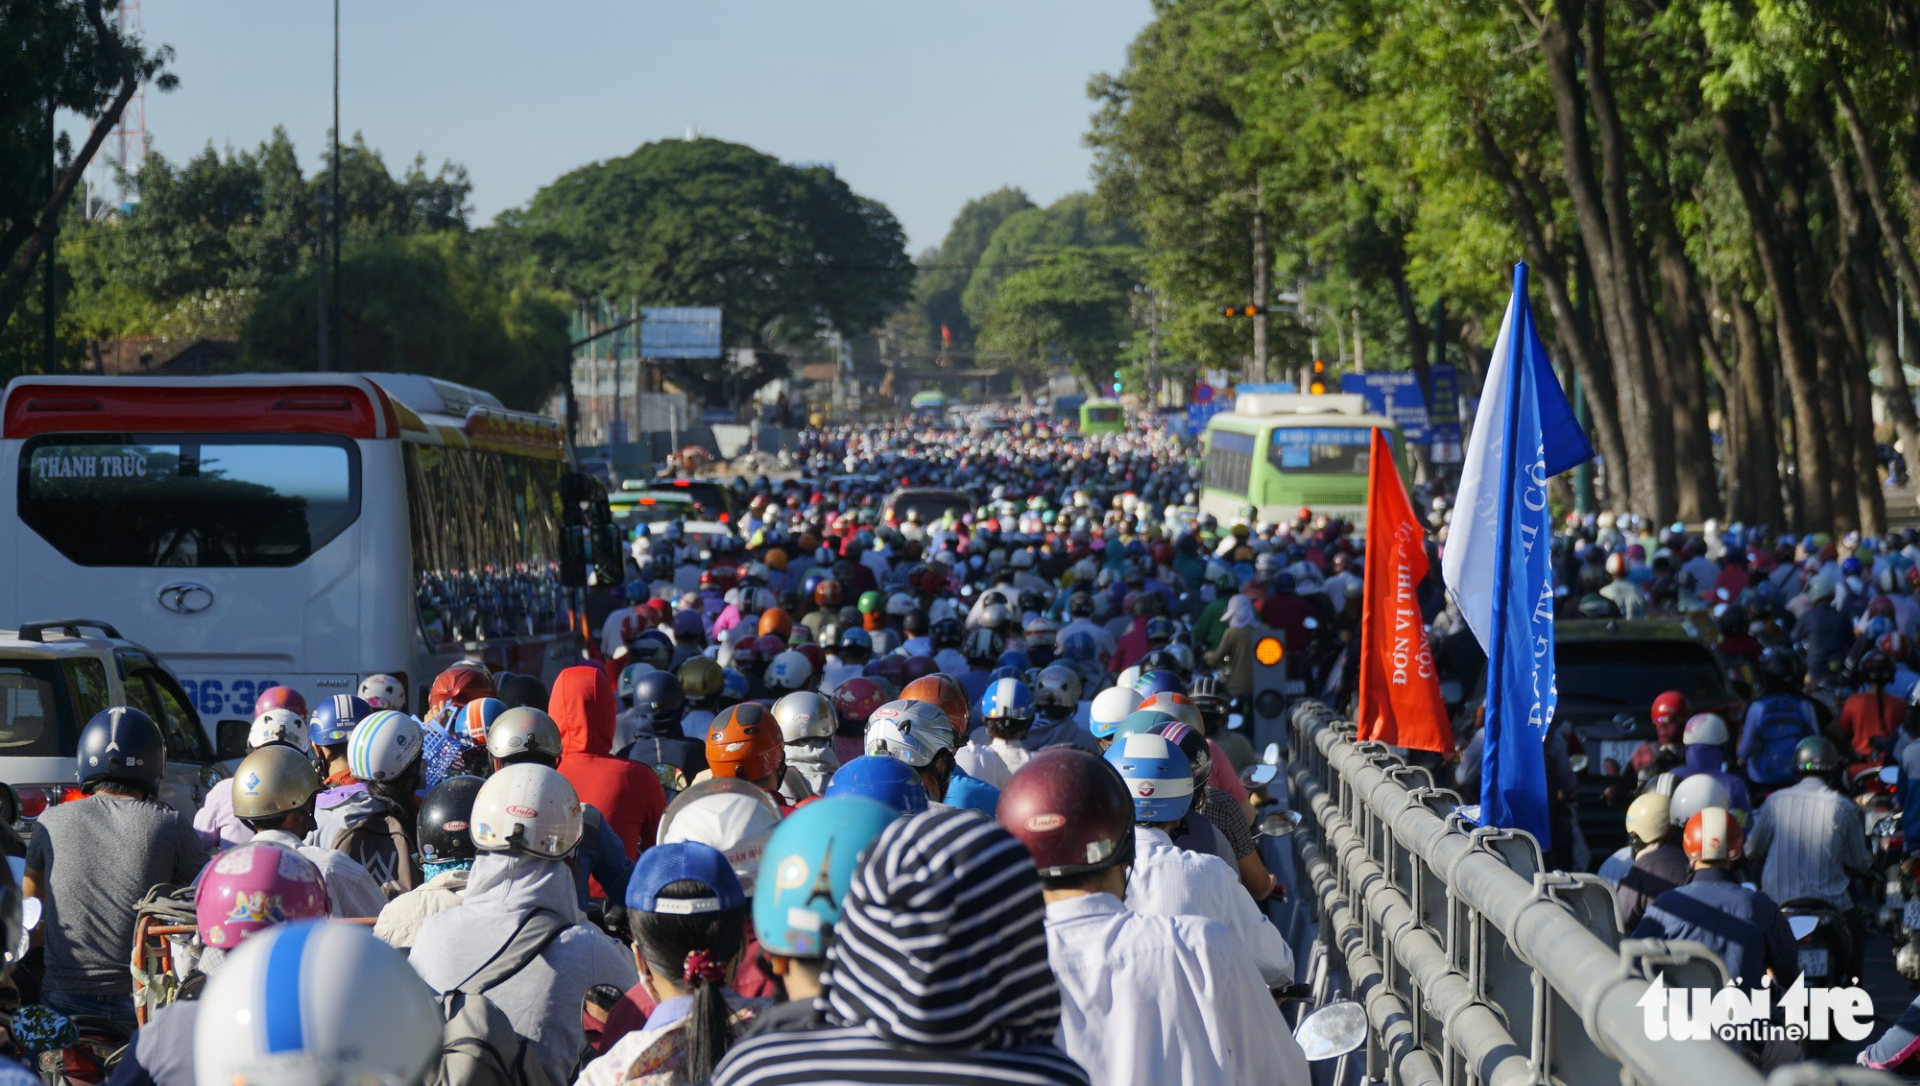 Vehicles descending the bridge waiting at the red light at the intersection of Hoang Minh Giam and Dang Van Sam Streets.